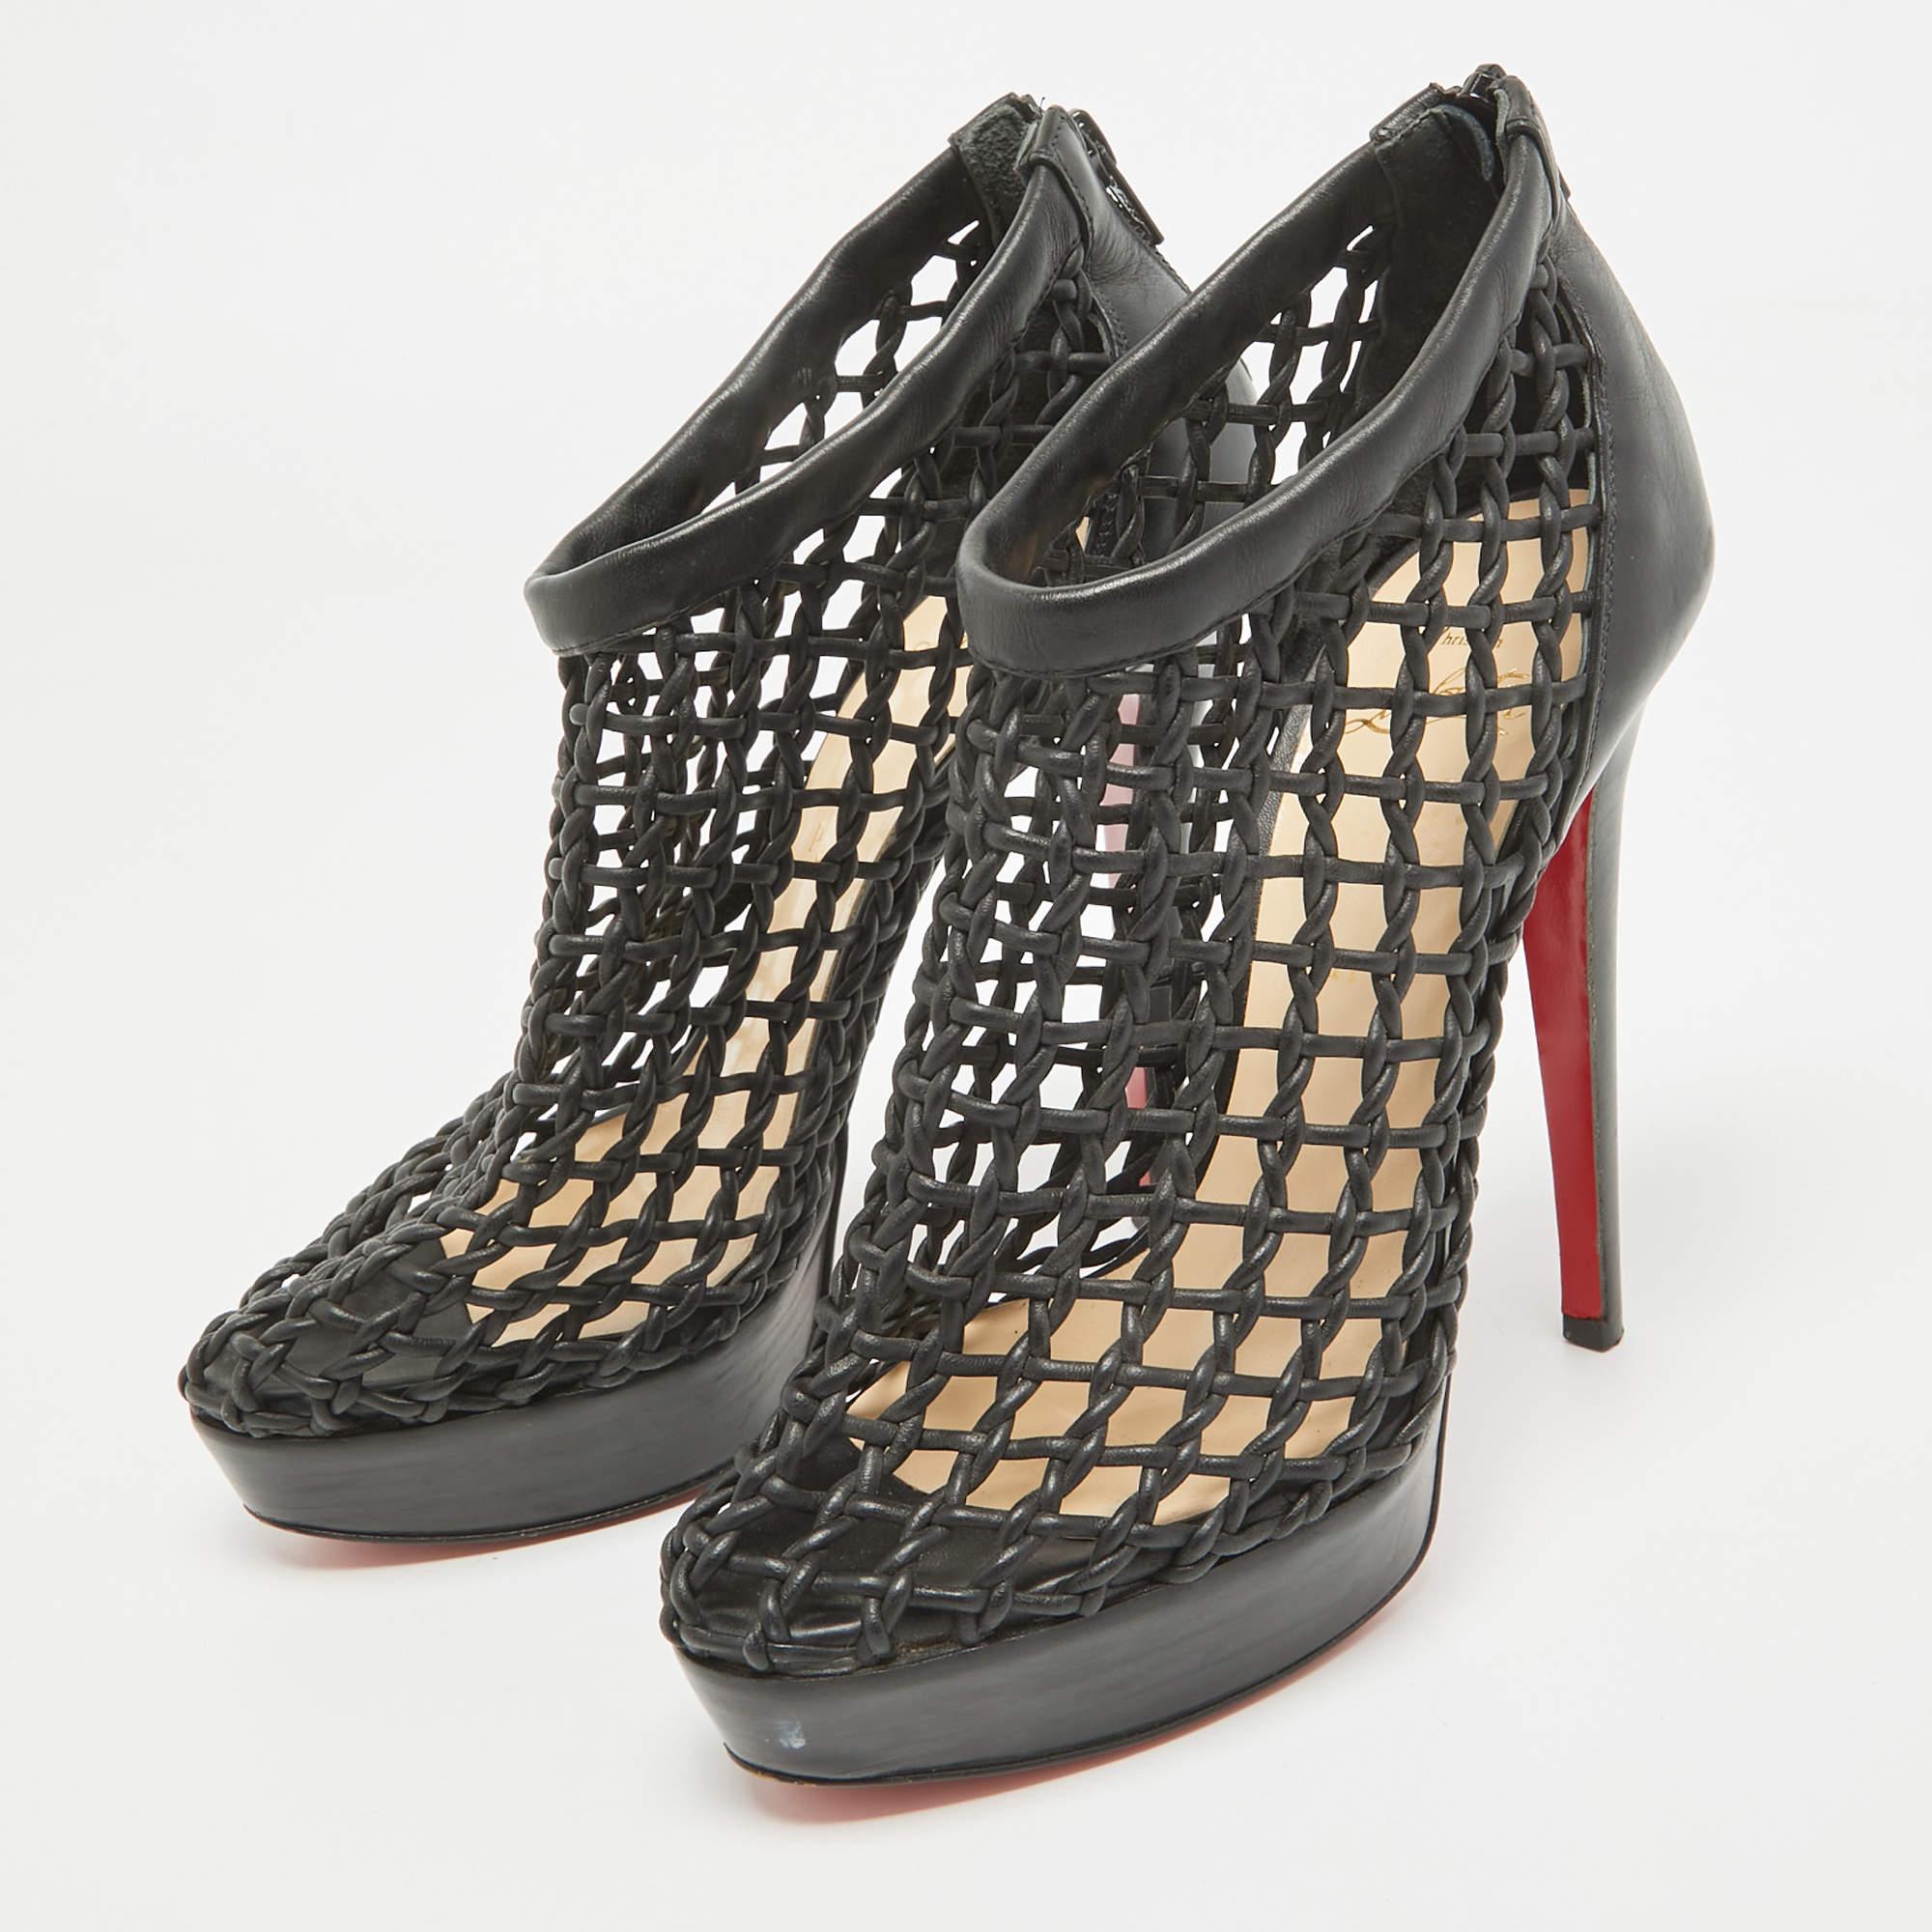 Christian Louboutin Black Leather Coussin Ankle Booties Size 39 For Sale 2